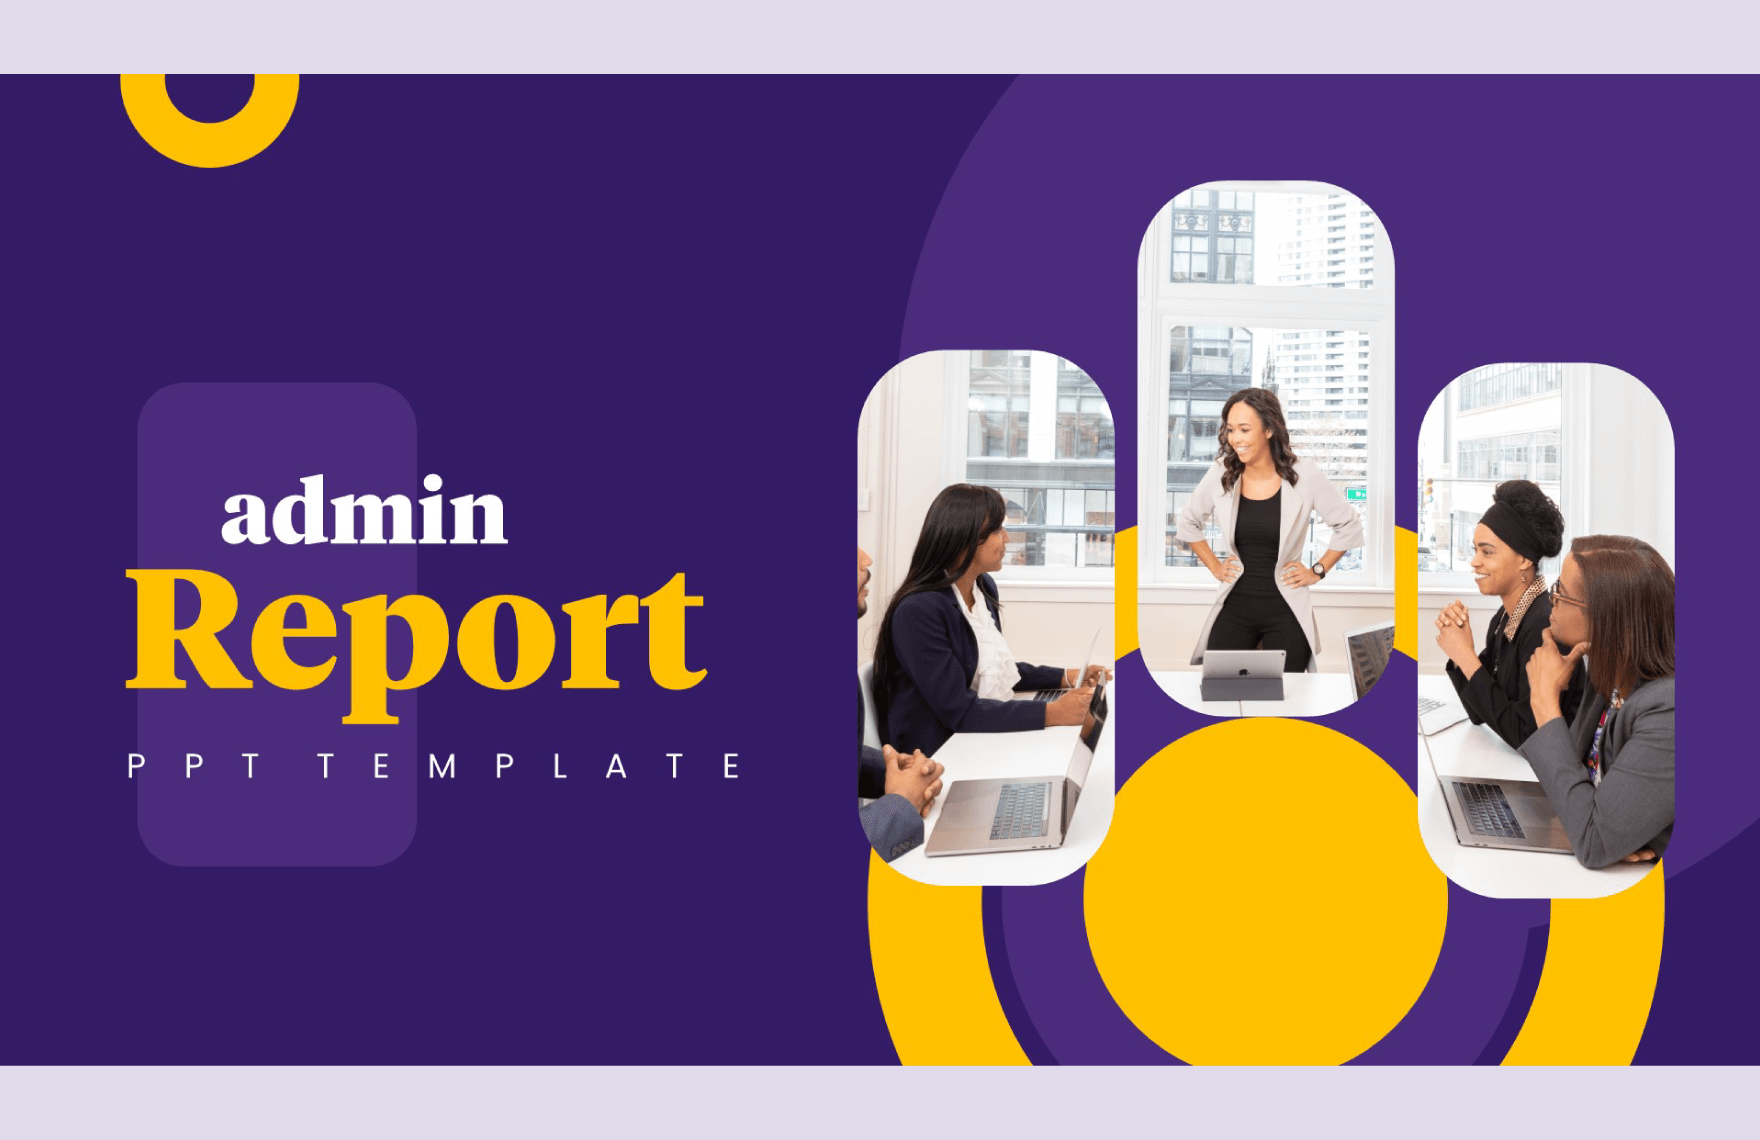 Admin Report PPT Template